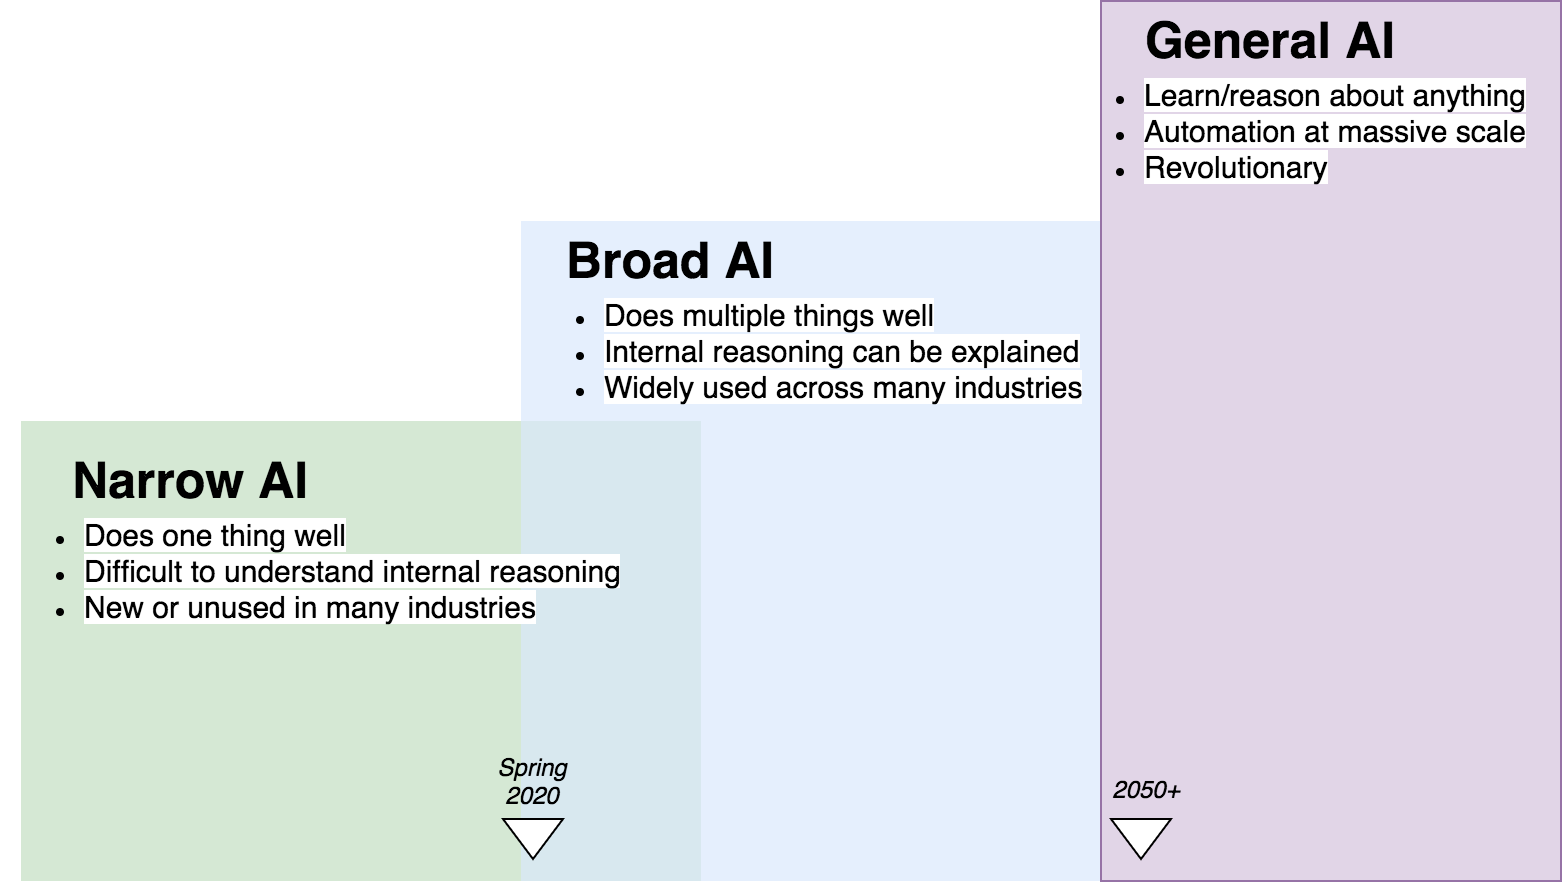 A diagram composed of three boxes representing the three major phases of artificial intelligence. The smallest box represents Narrow AI, capable of doing one thing well, is difficult to understand, and is new or unused in many industries. The medium sized box is for Broad AI, which can do multiple things well, has explainable internal reasoning, and is widely used across many industries. Current state of the art is between these two boxes. The largest box symbolizes General AI, capable of learning and reasoning about anything, automates at massive scale, and revolutionizes society.